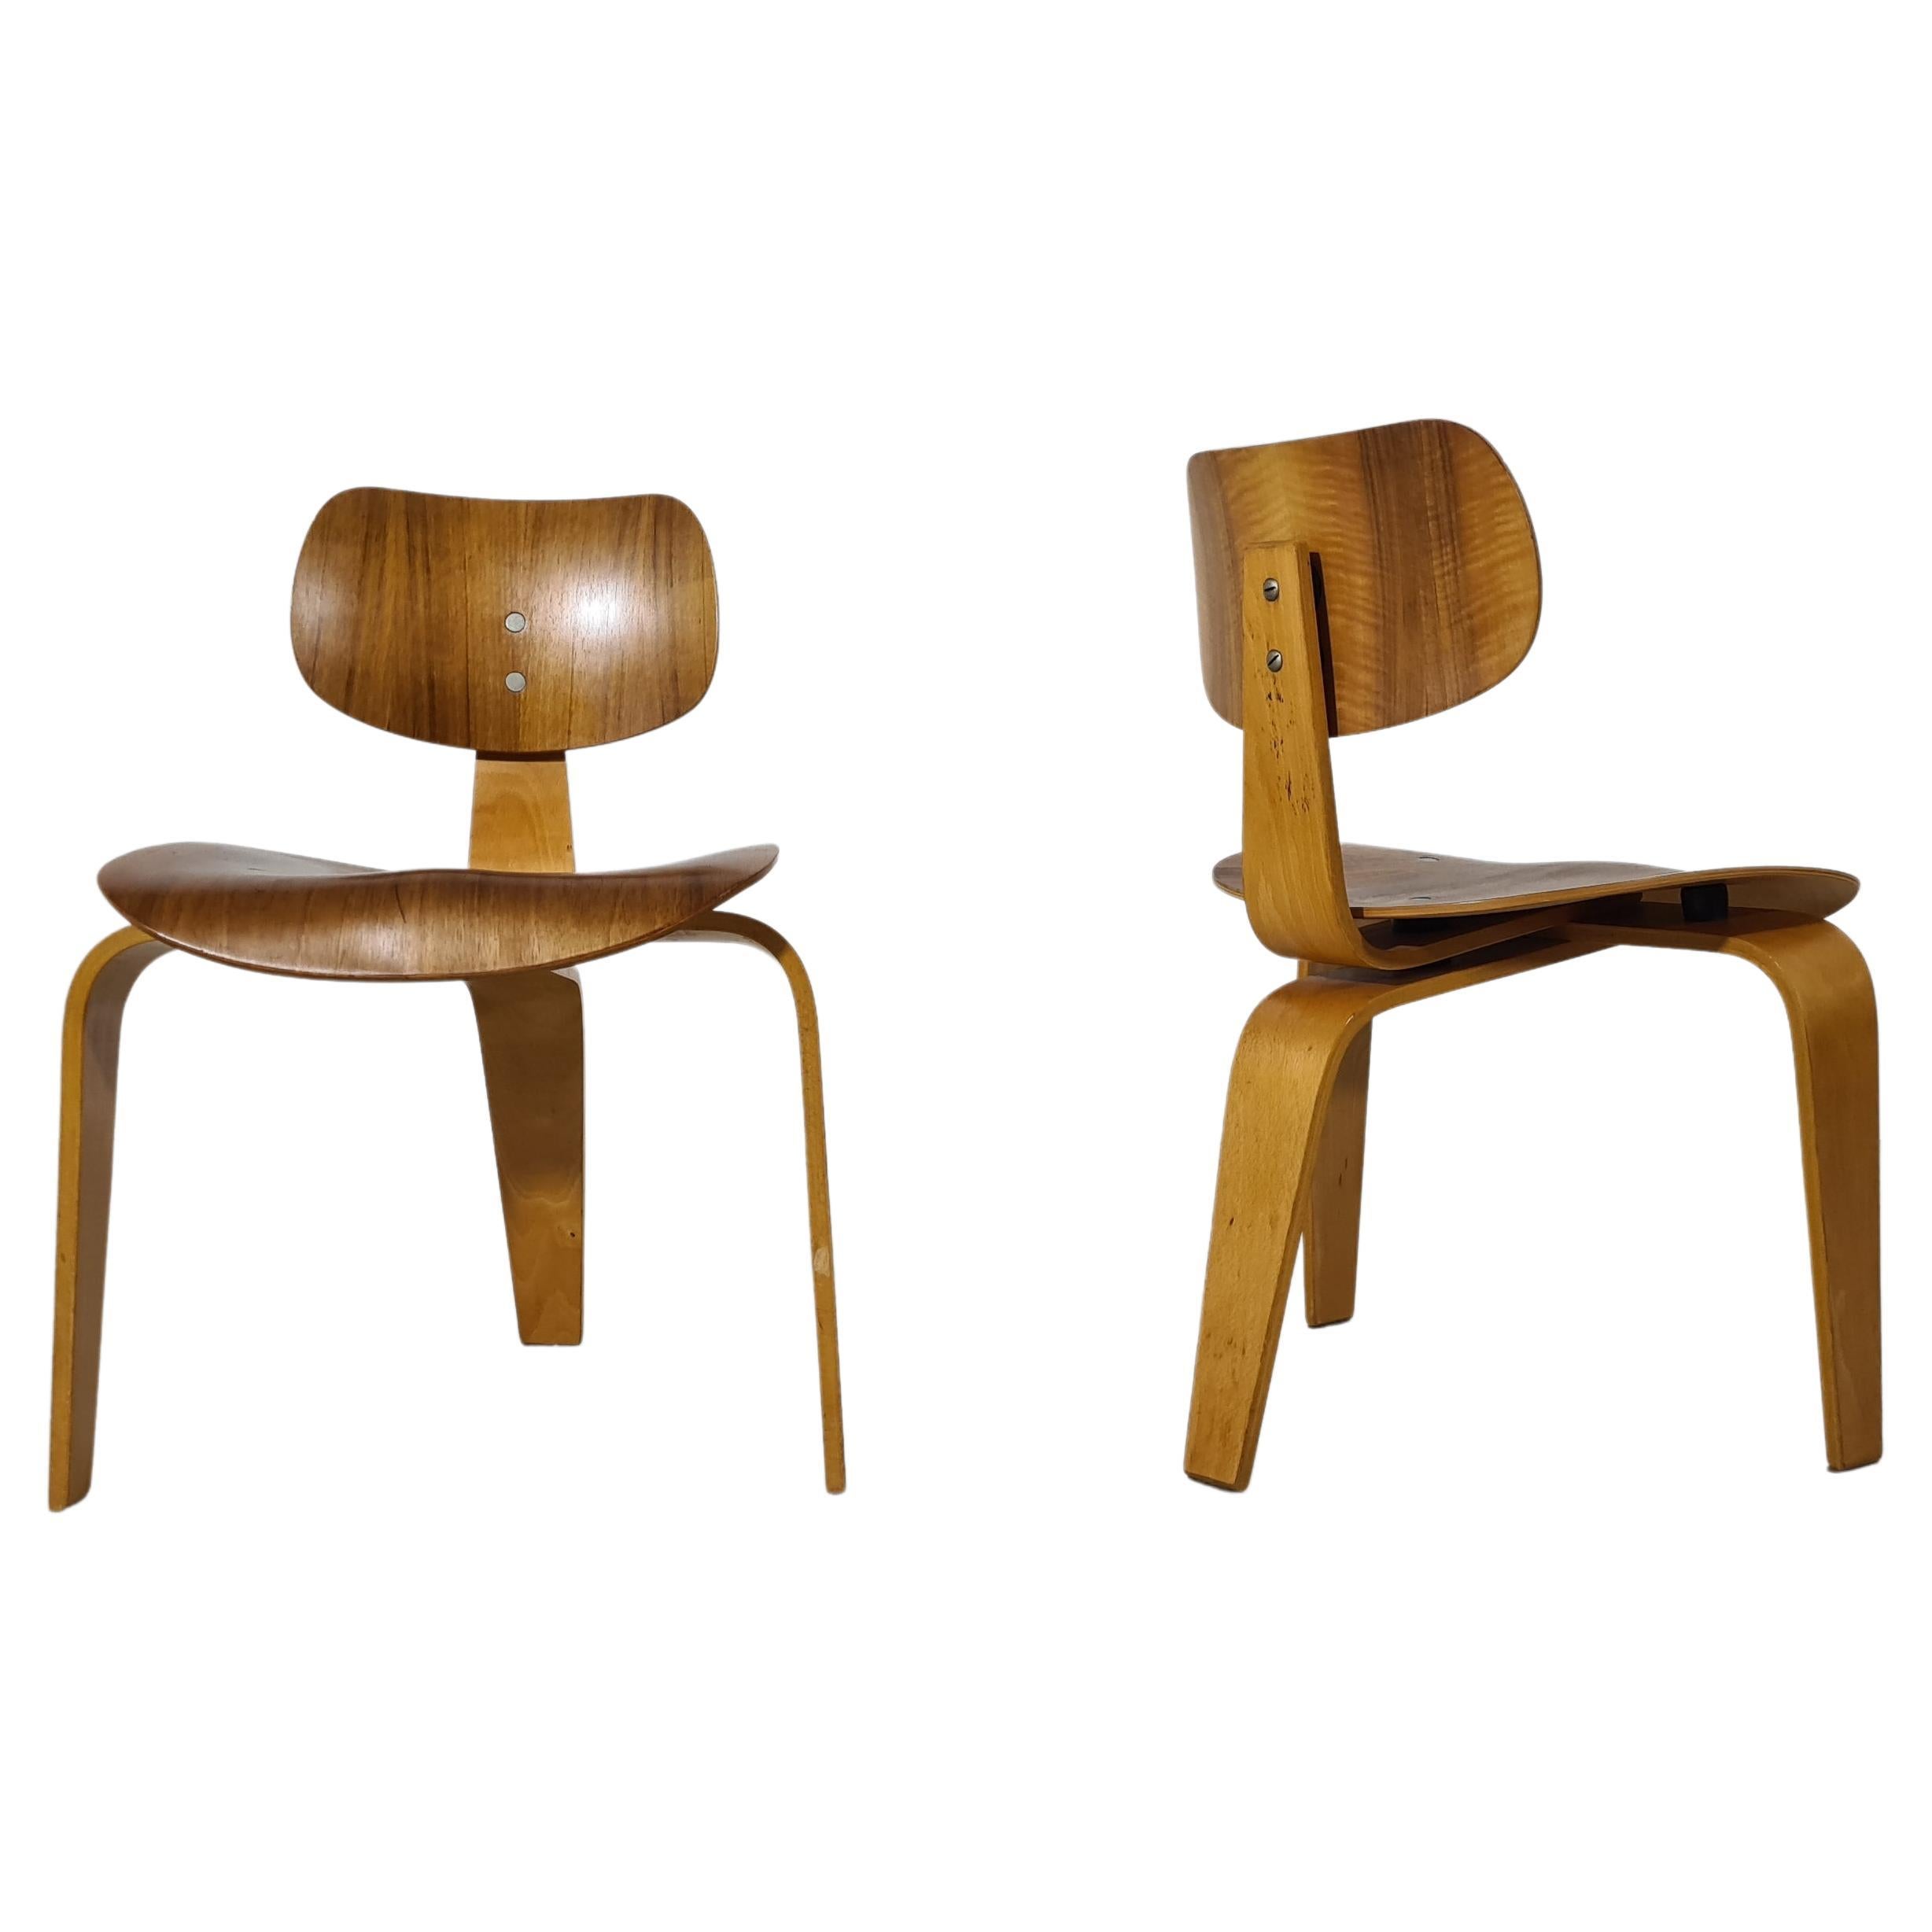 Pair of Egon Eiermann Chairs Se 42/Se 3 produced by Wilde & Spieth in 1950